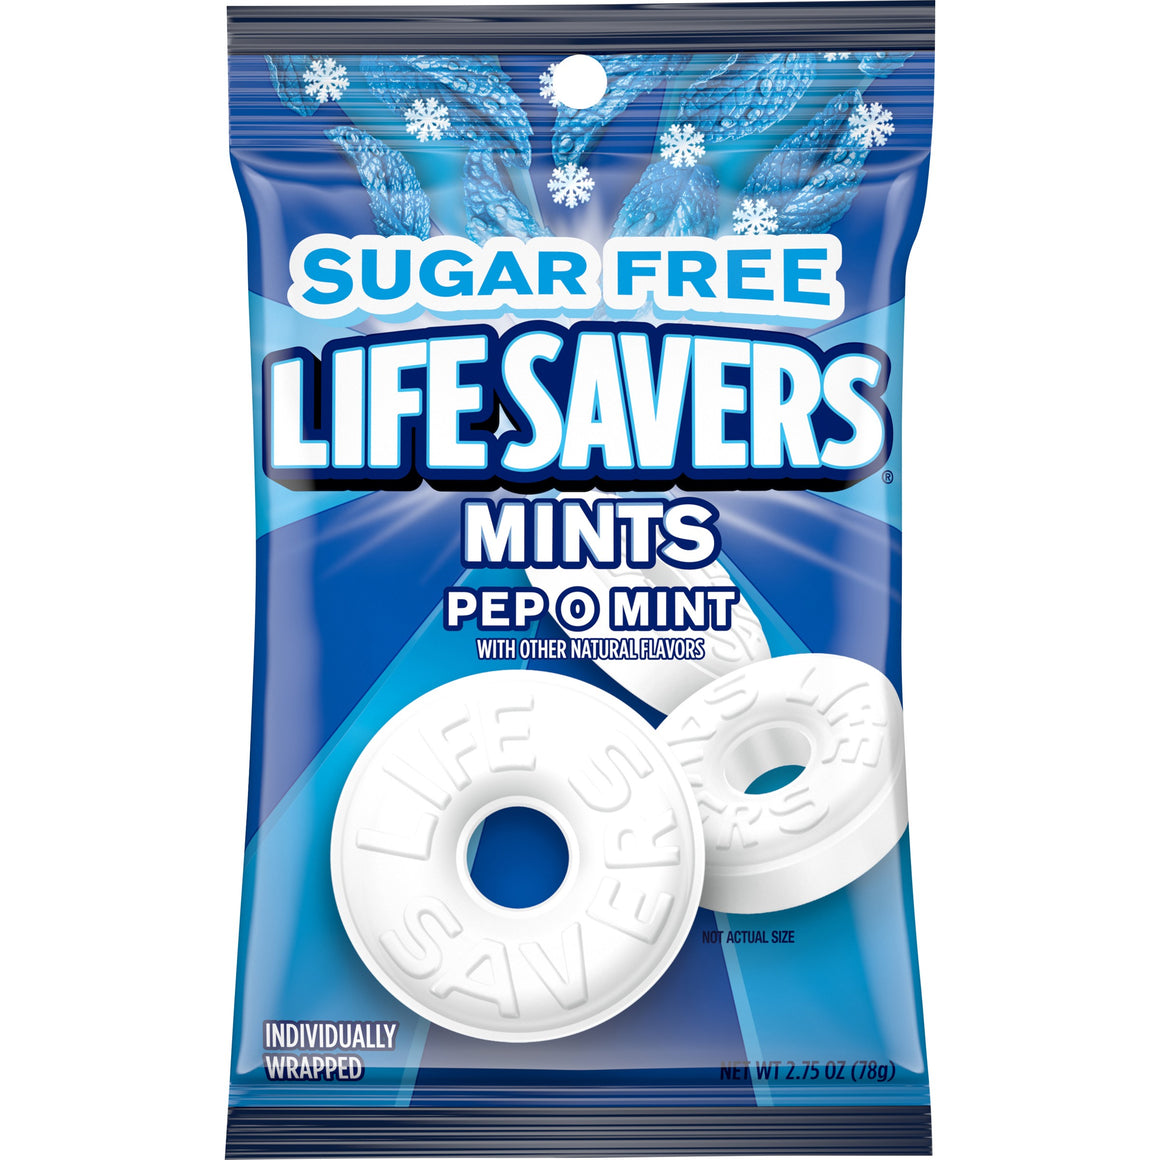 All City Candy Life Savers Sugar Free Mints Pep O Mint - 2.75-oz. Bag Hard Wrigley For fresh candy and great service, visit www.allcitycandy.com